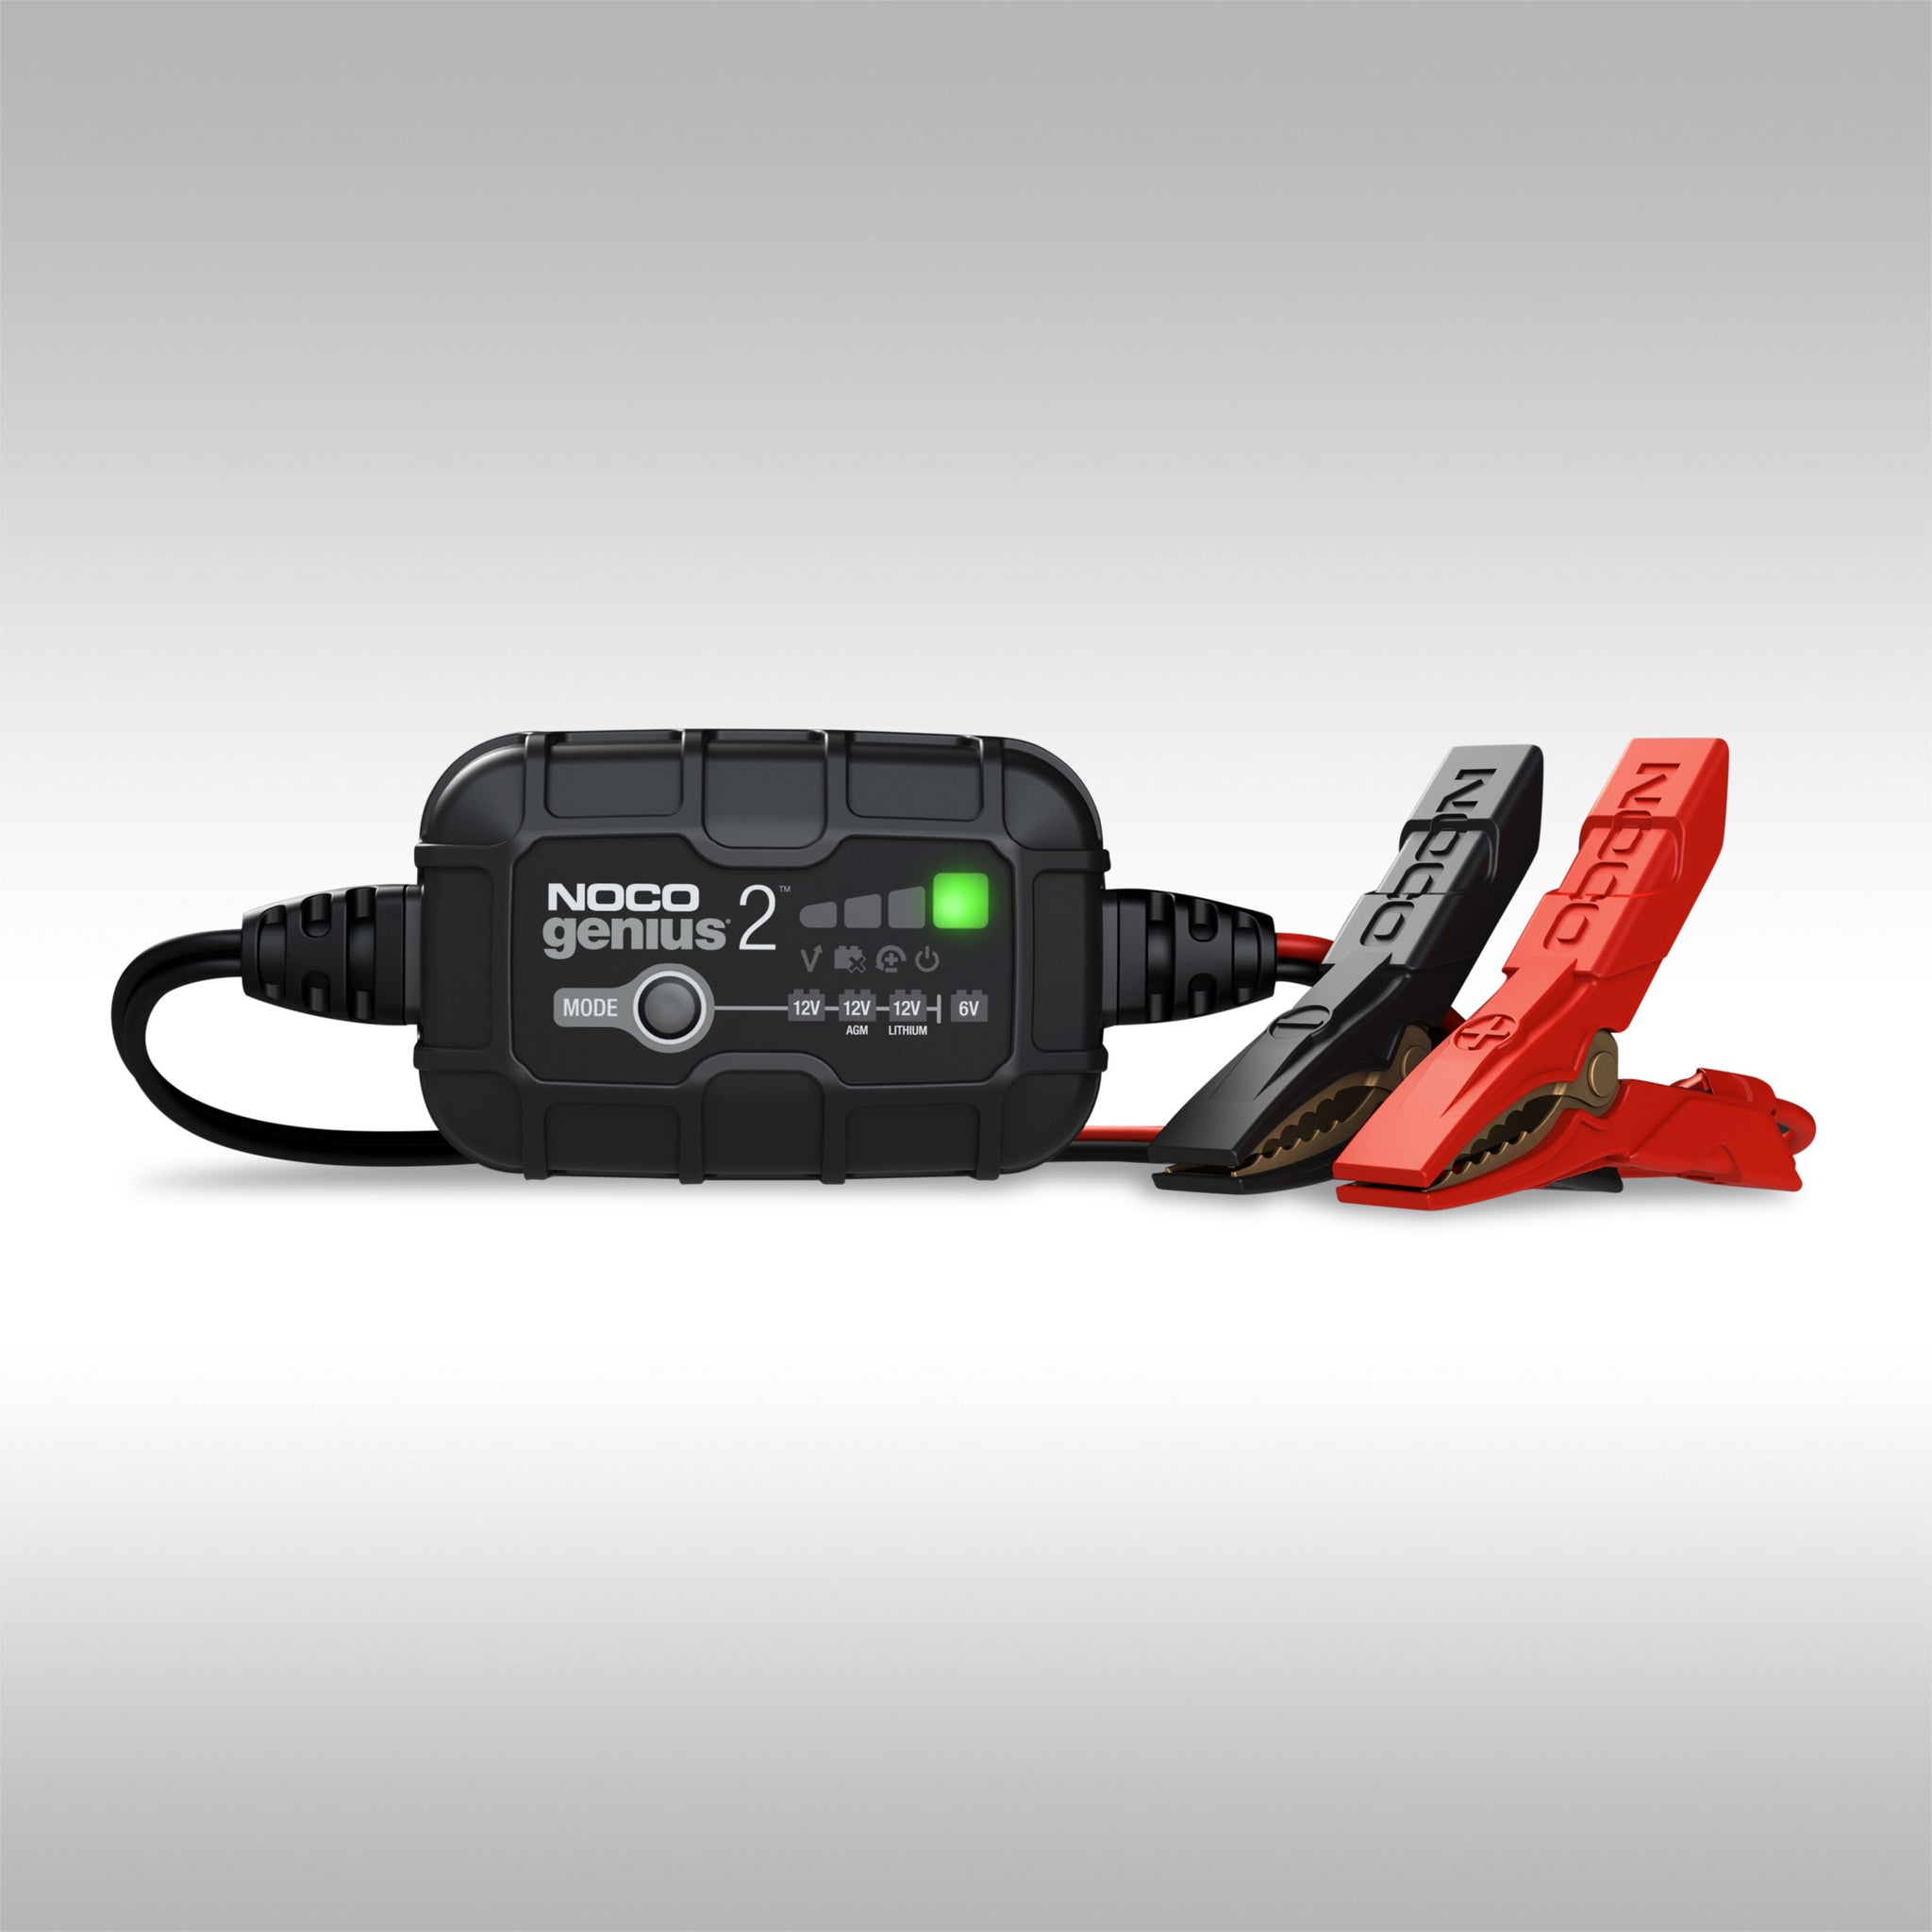 NOCO - GENIUS 2 BATTERY CHARGER - Upshift Online Inc.